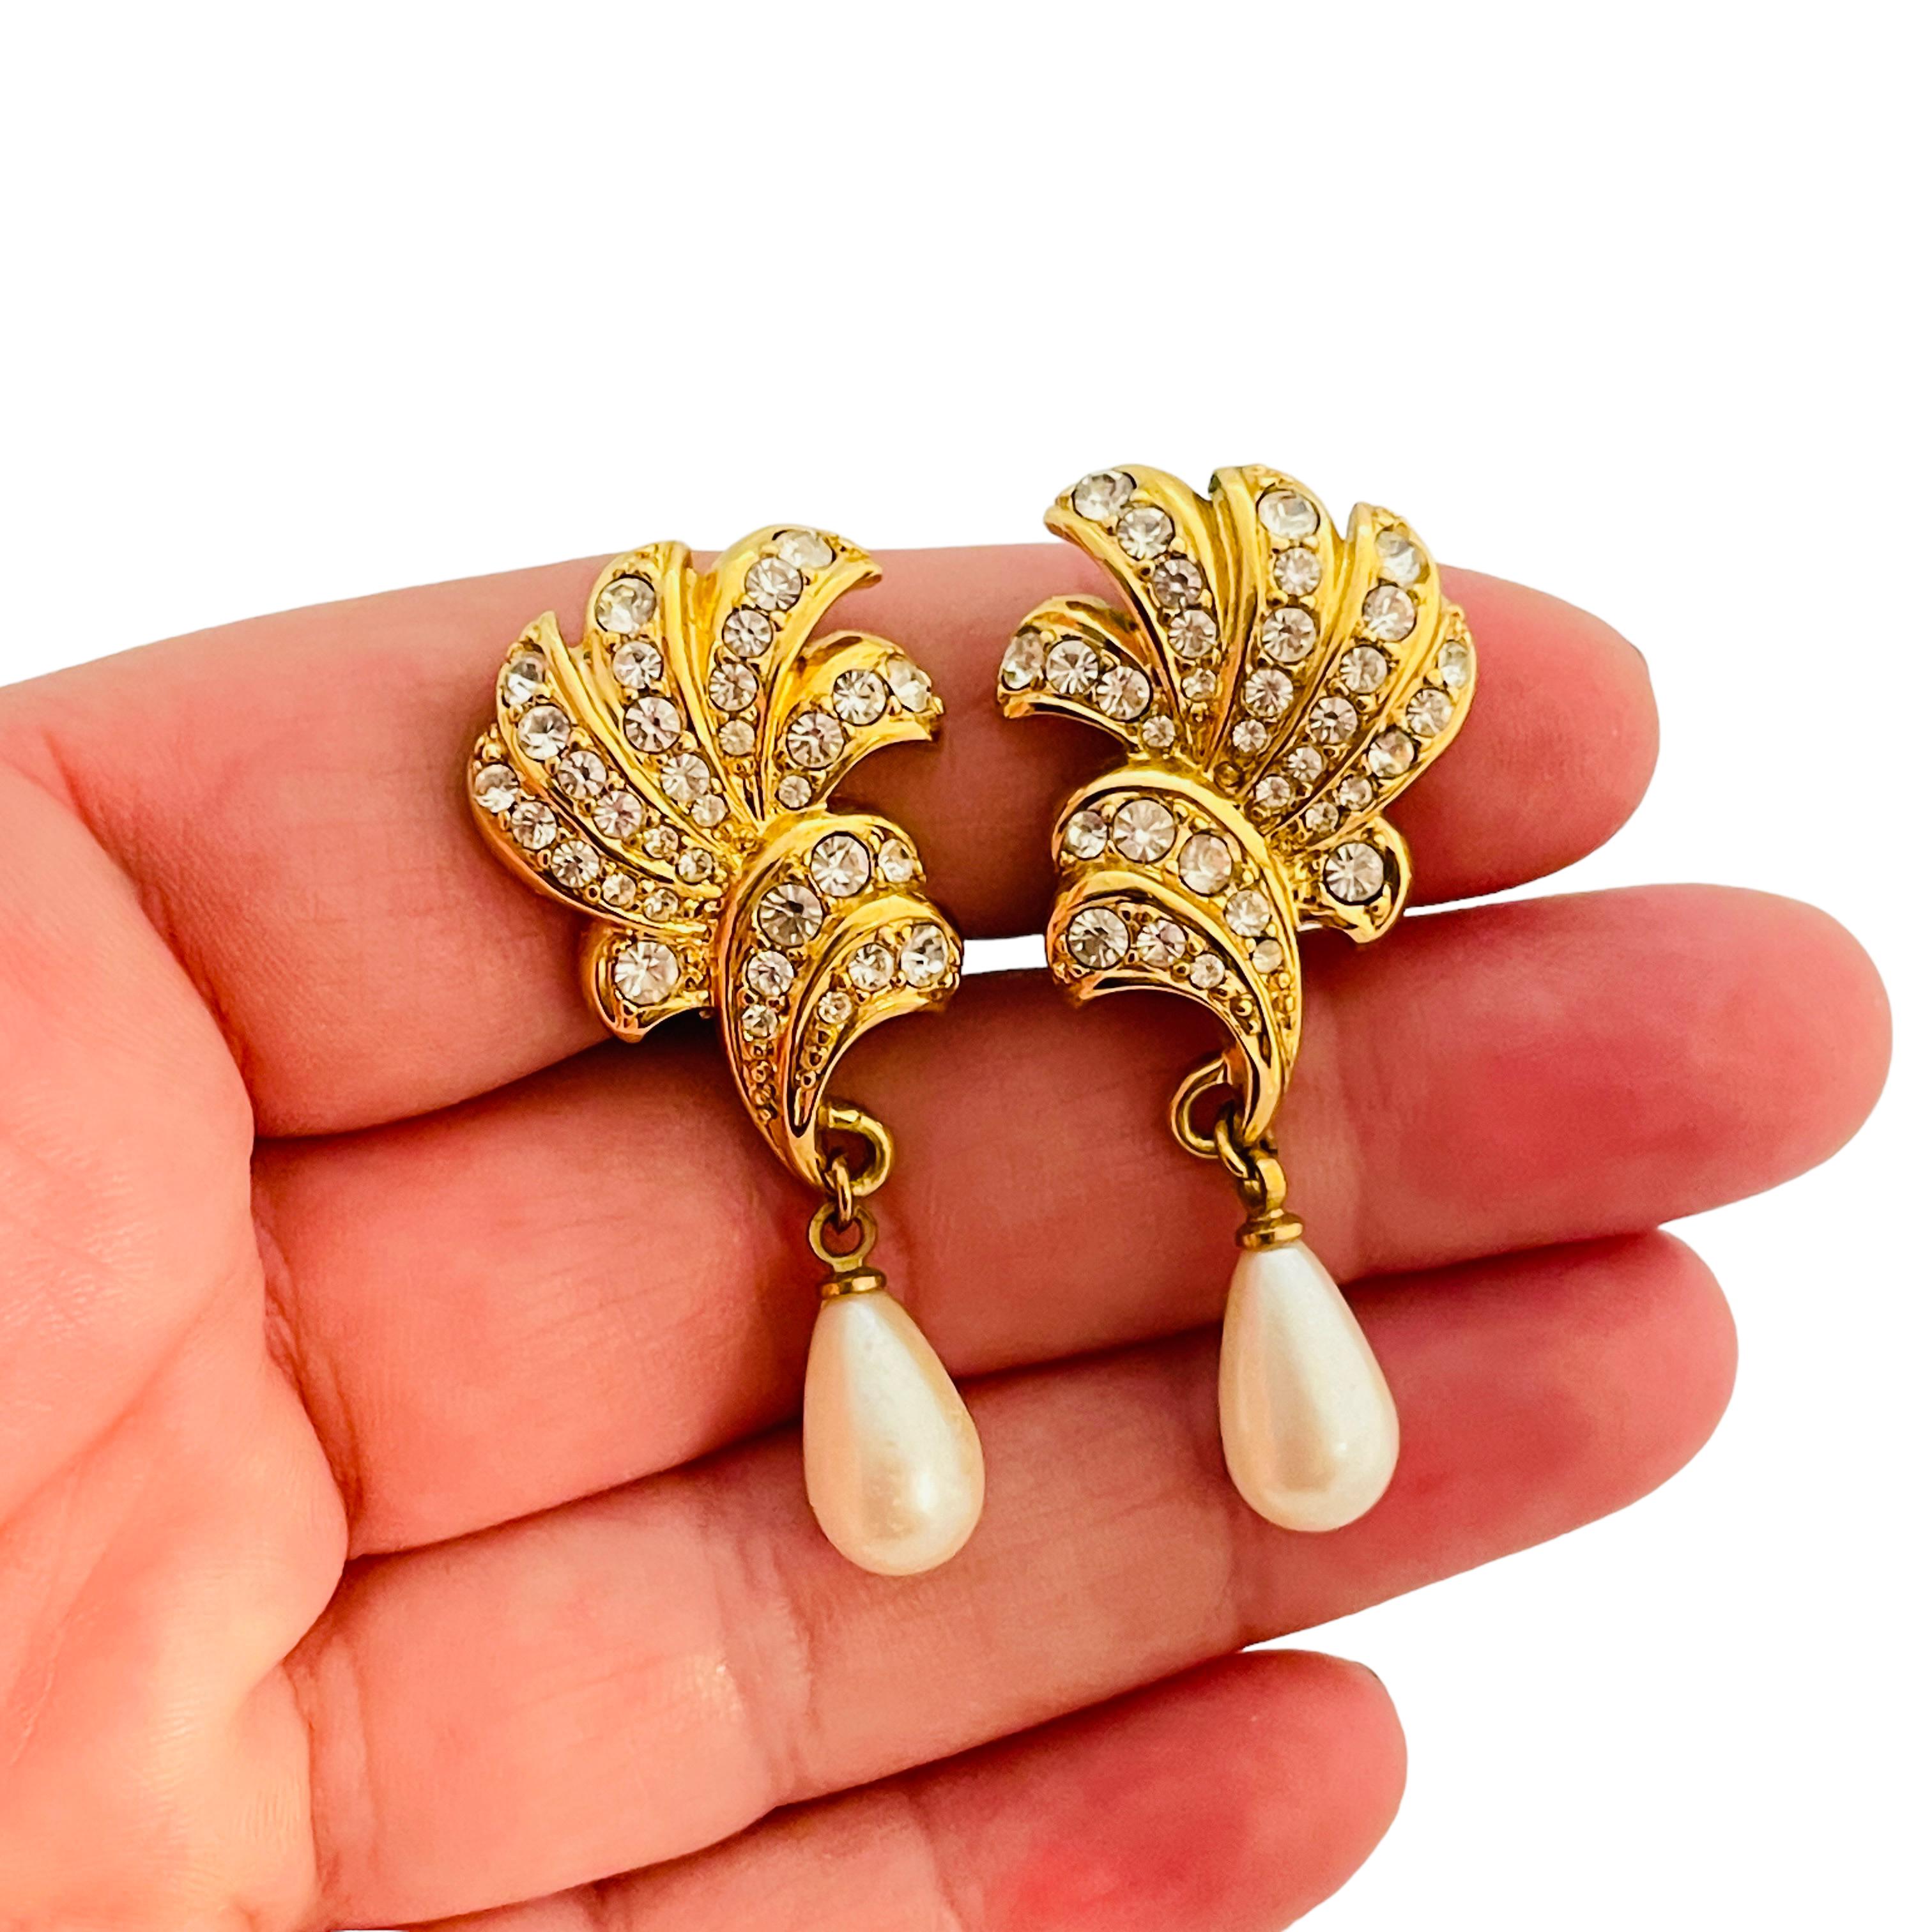 Vintage gold rhinestones dangle pearl designer runway clip on earrings In Good Condition For Sale In Palos Hills, IL